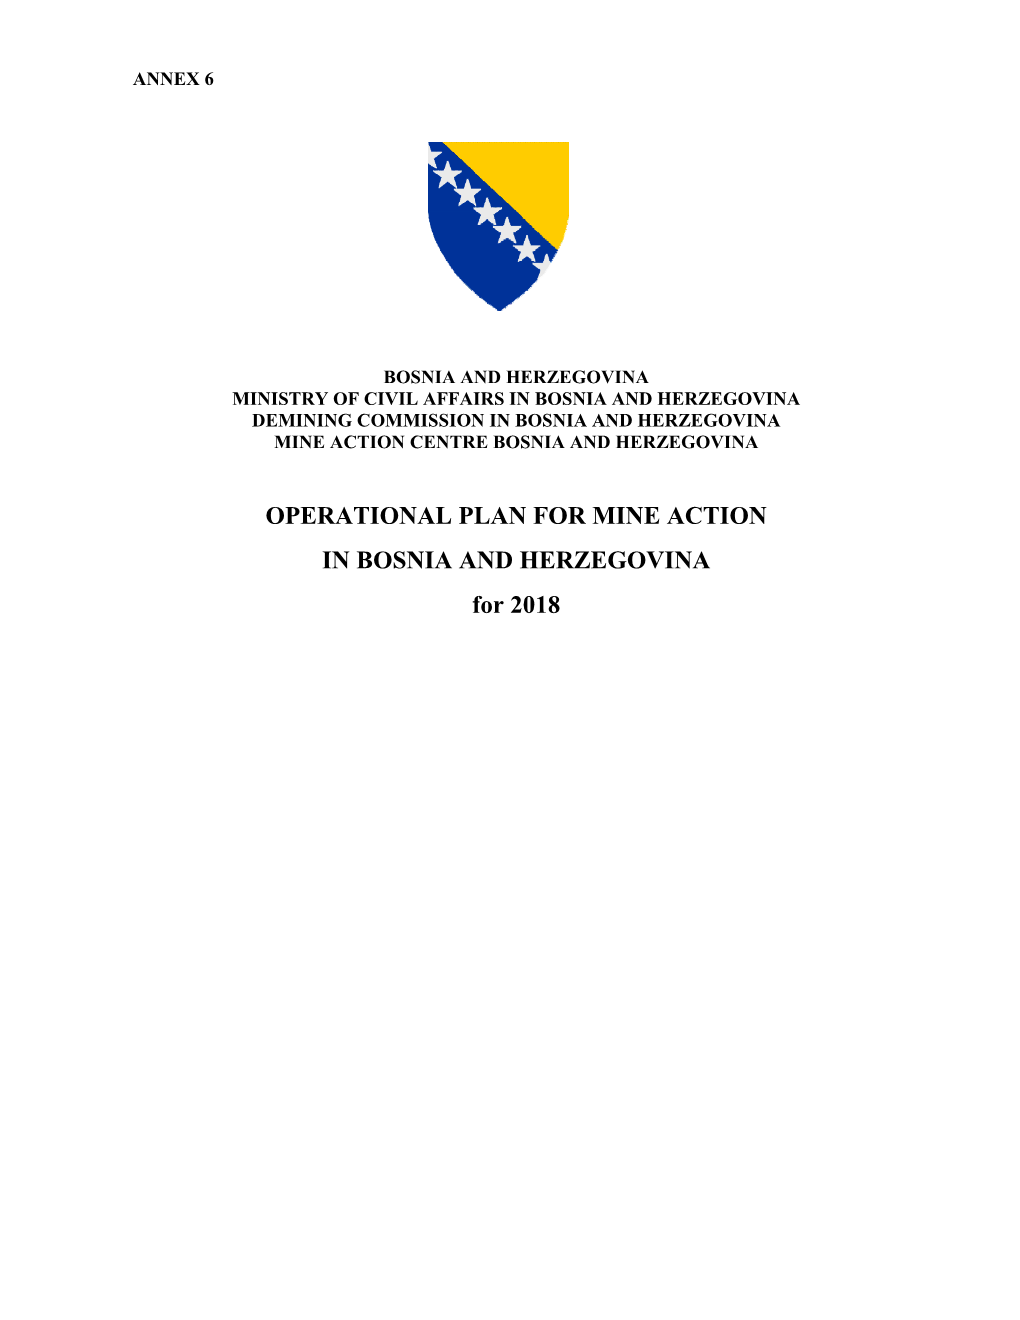 OPERATIONAL PLAN for MINE ACTION in BOSNIA and HERZEGOVINA for 2018